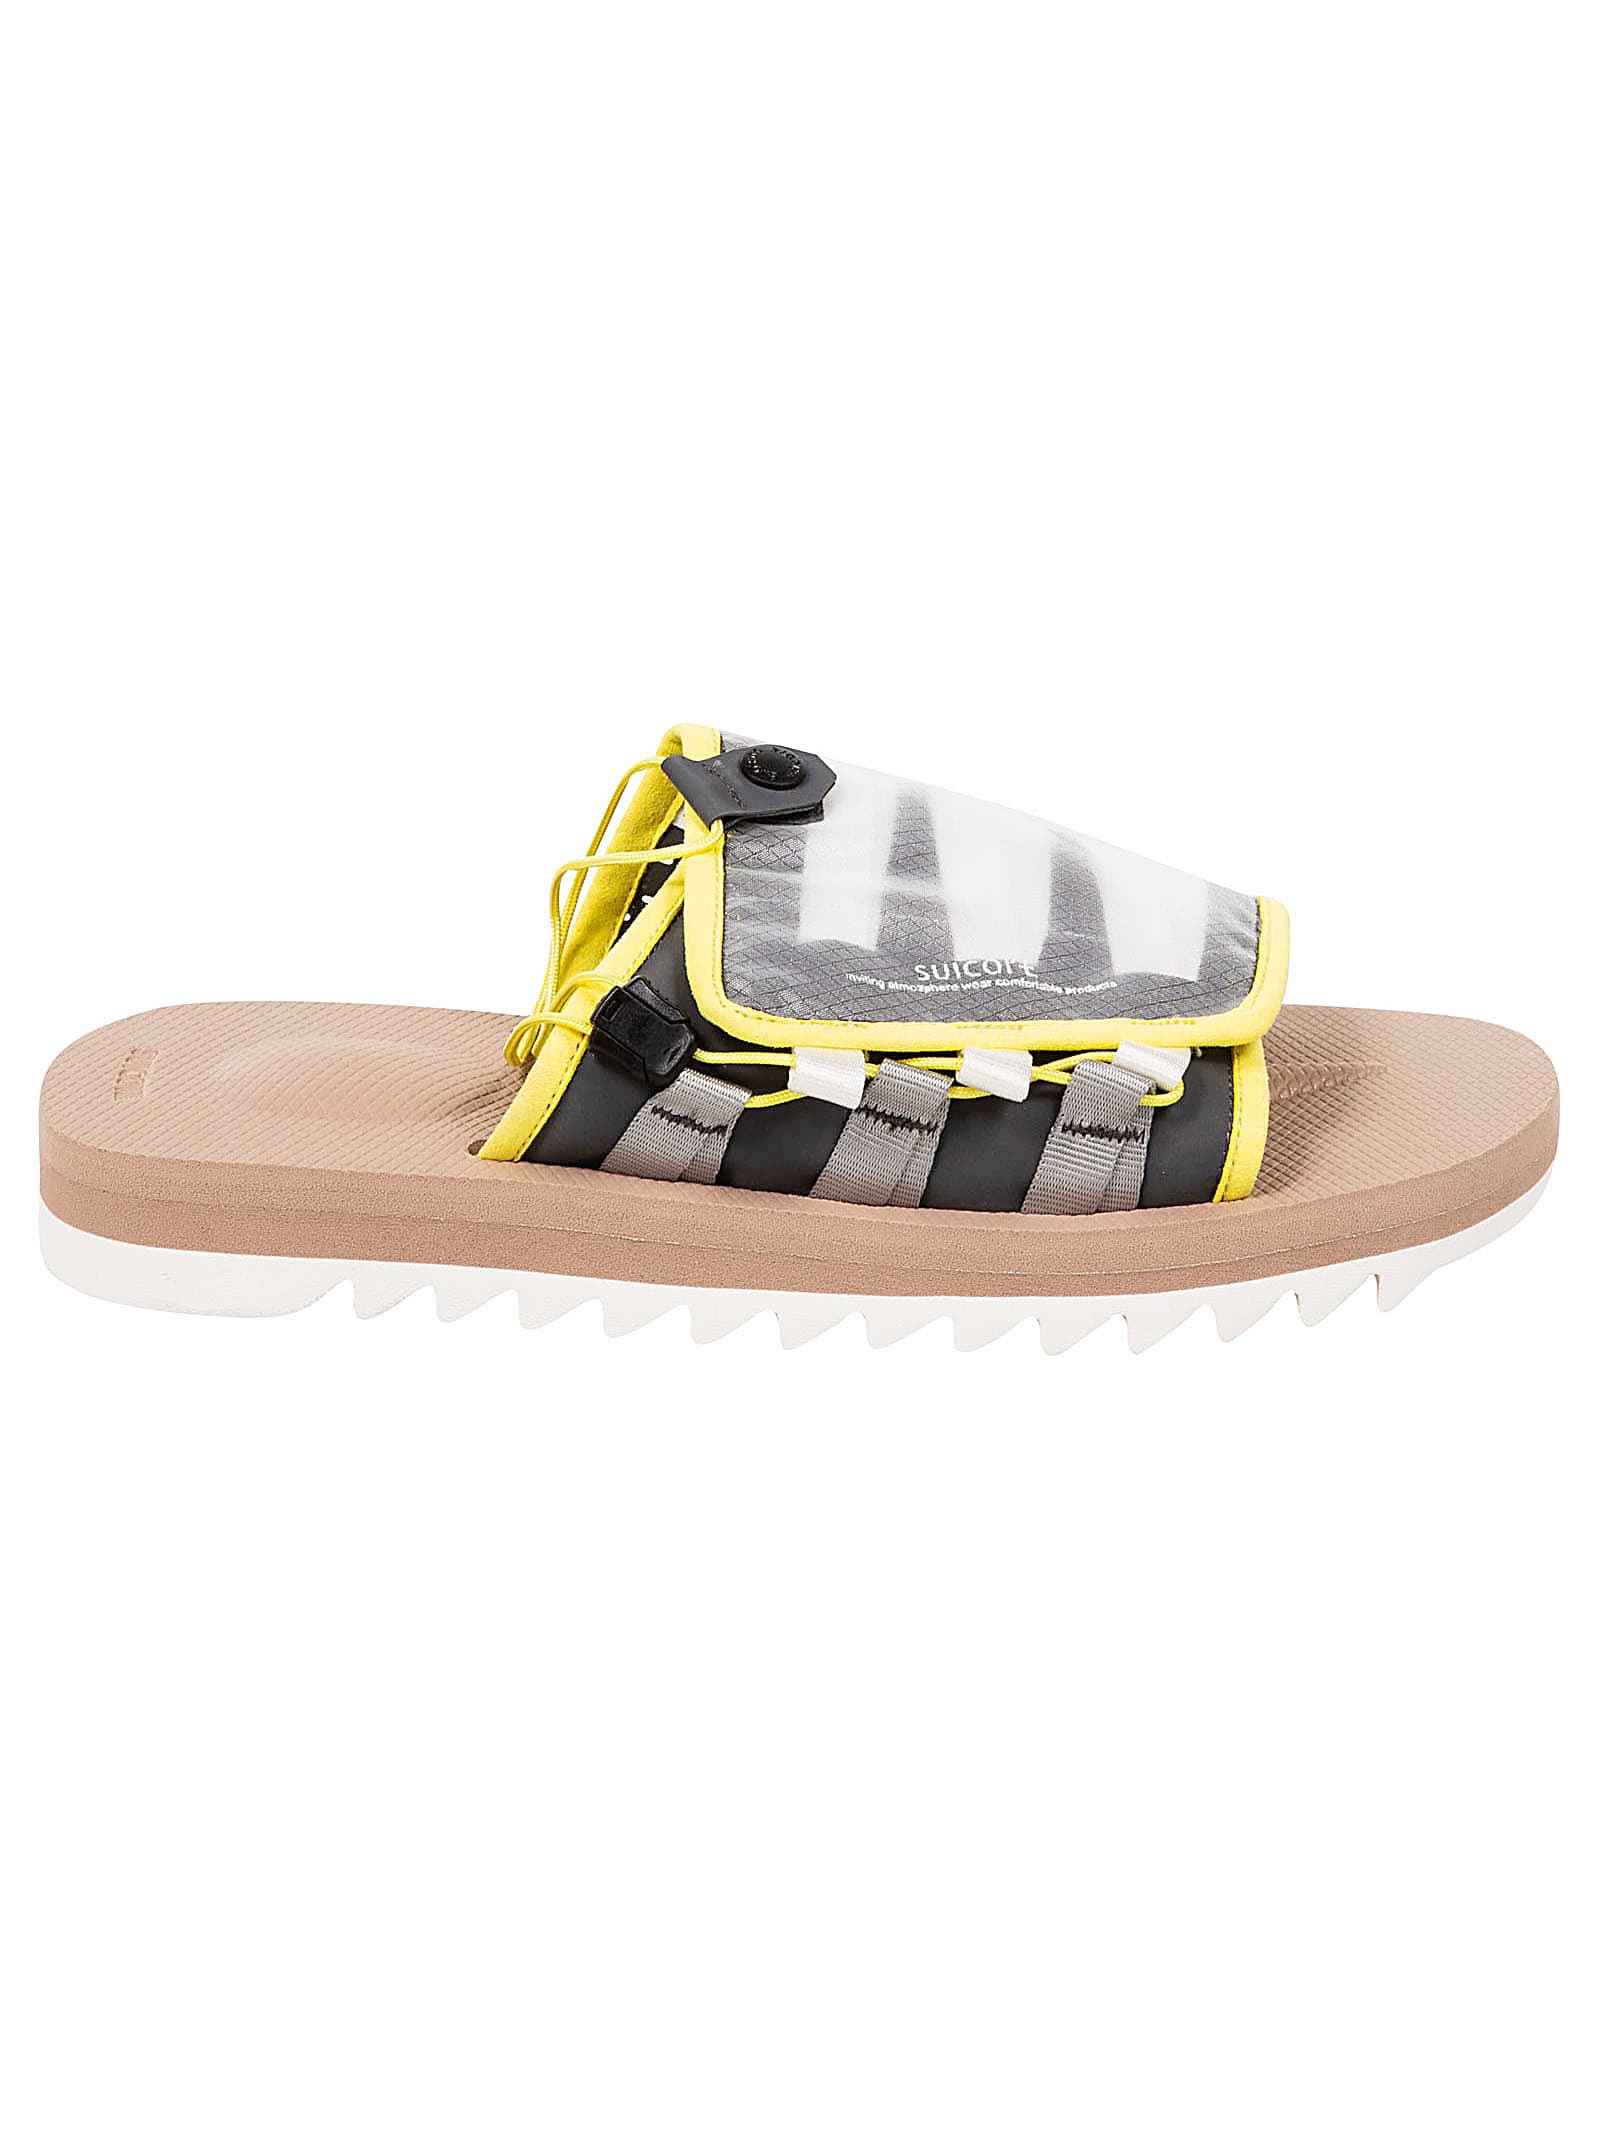 SUICOKE STRAPPED SLIDERS,11266611